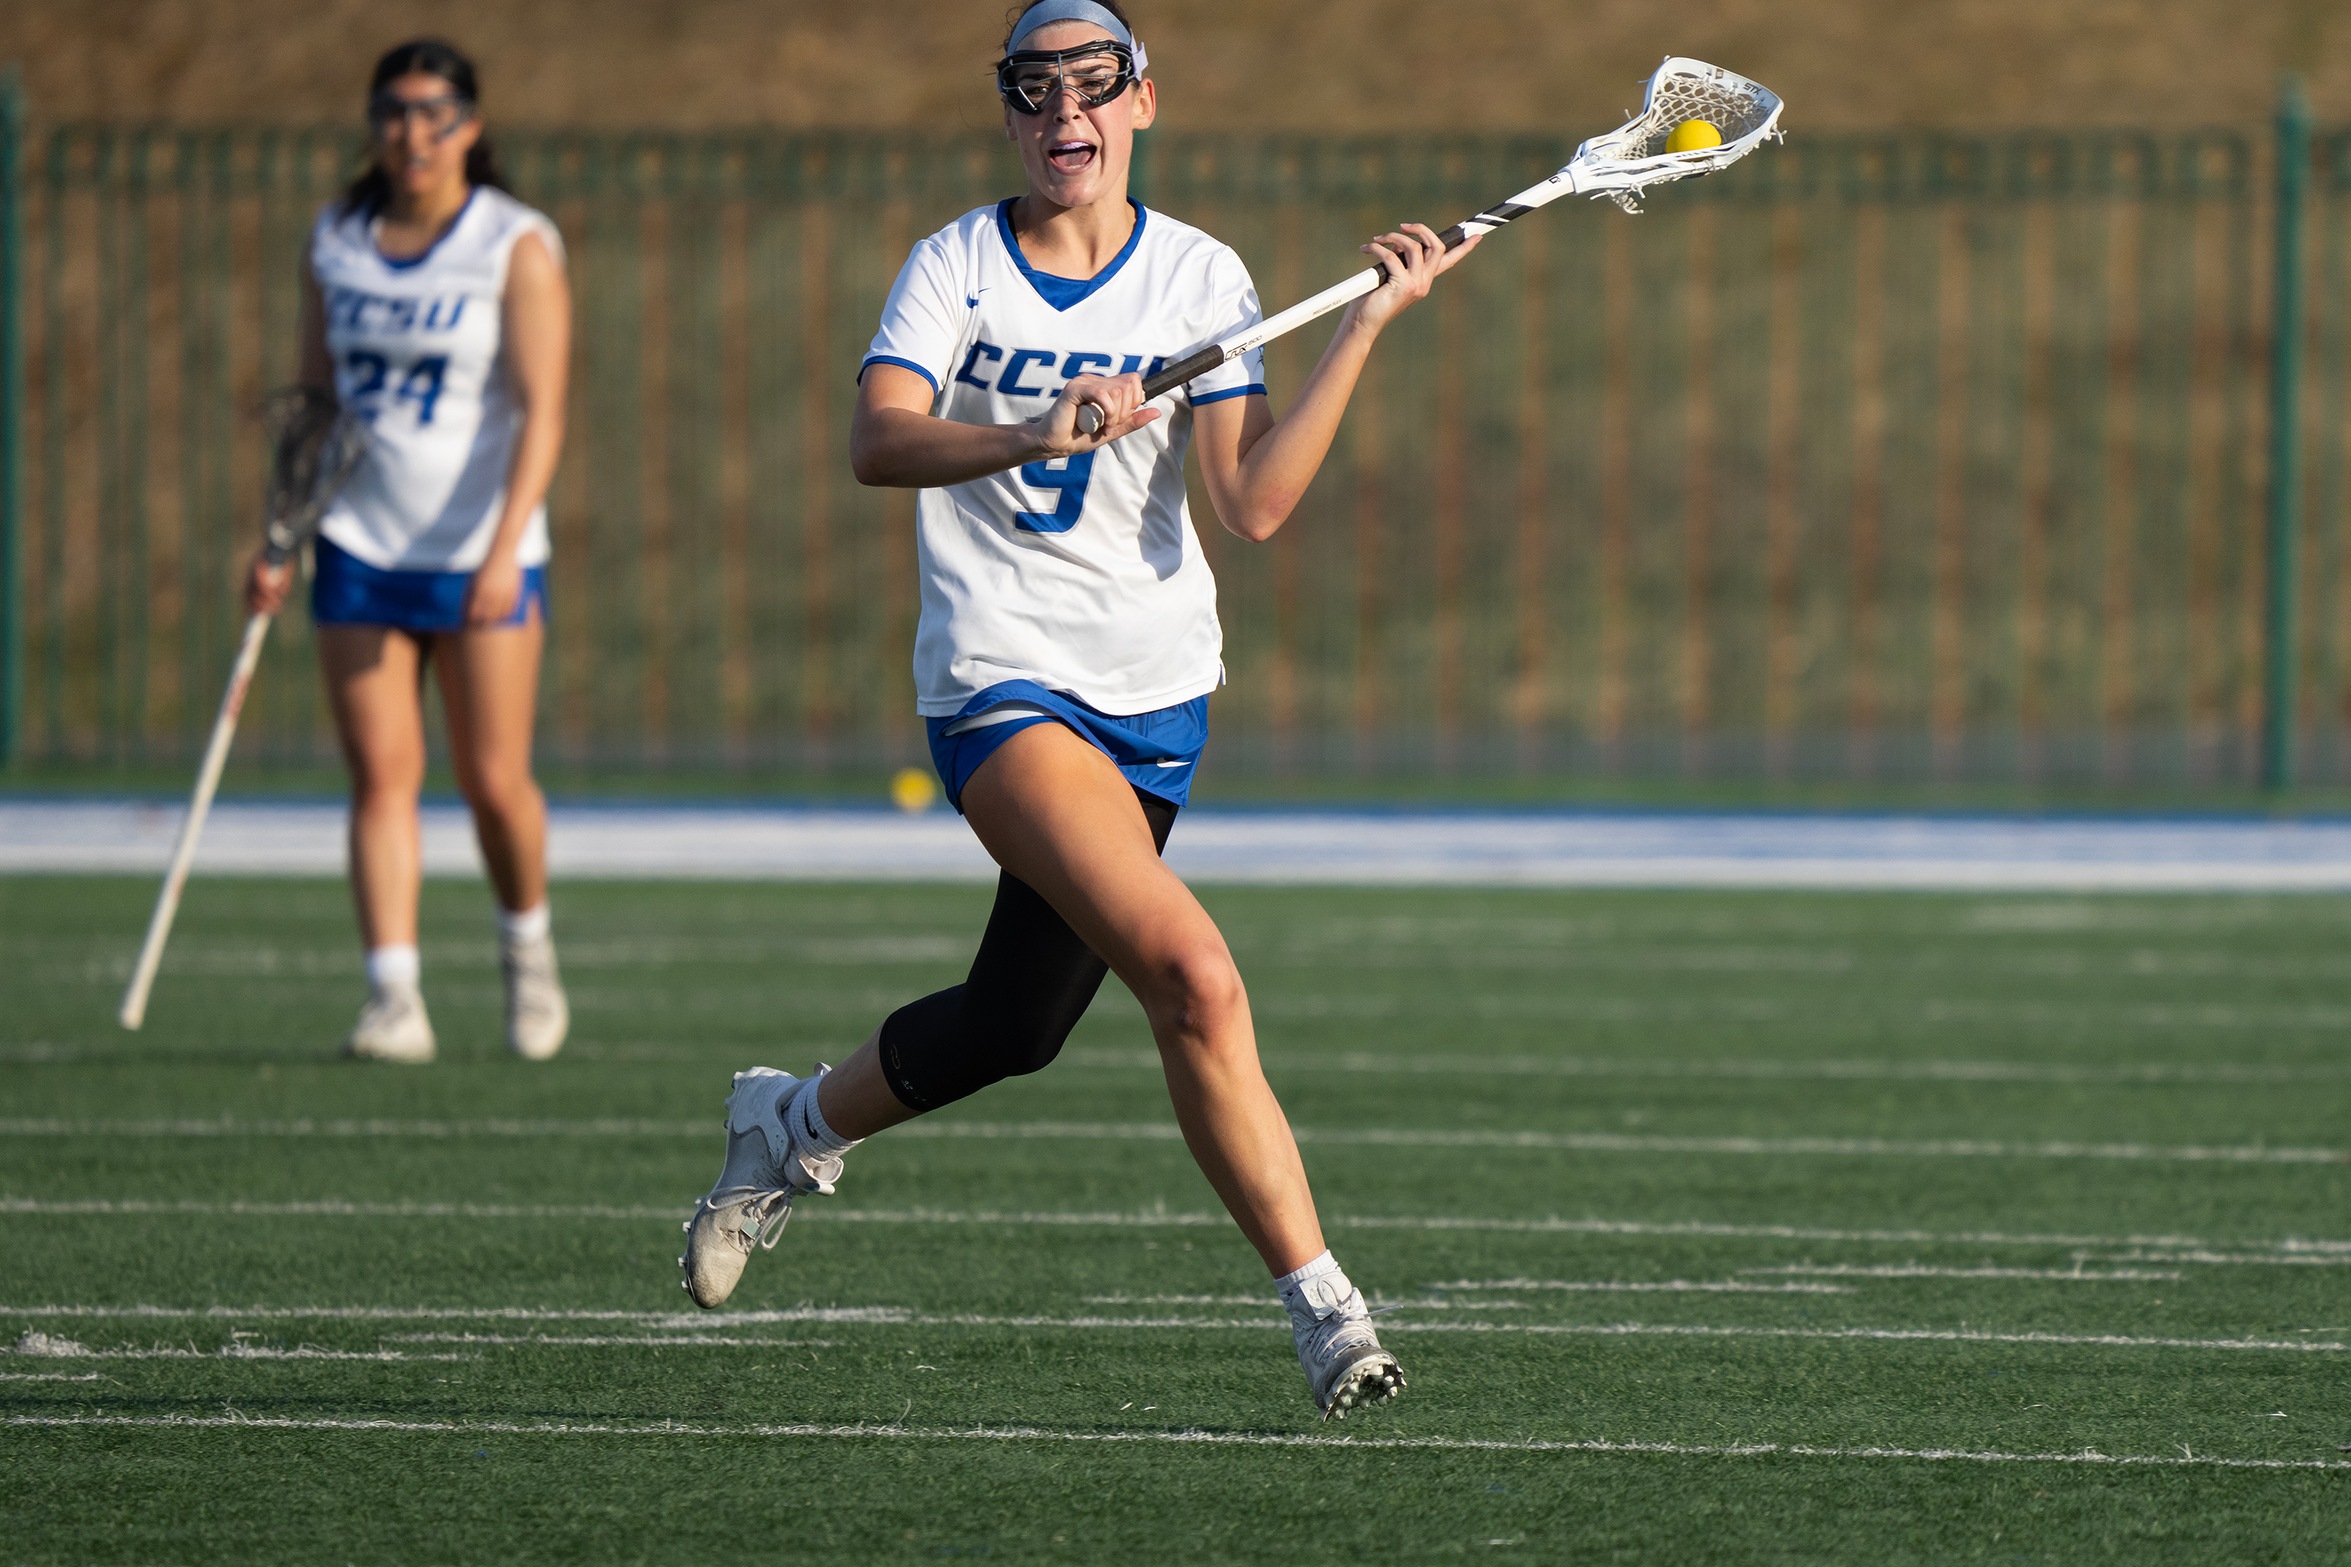 Madison Cowdin set a school record with 12 draw controls in the Blue Devils 17-10 win over Howard in the 2023 season finale on April 29, 2023. (Photo: Steve McLaughlin)